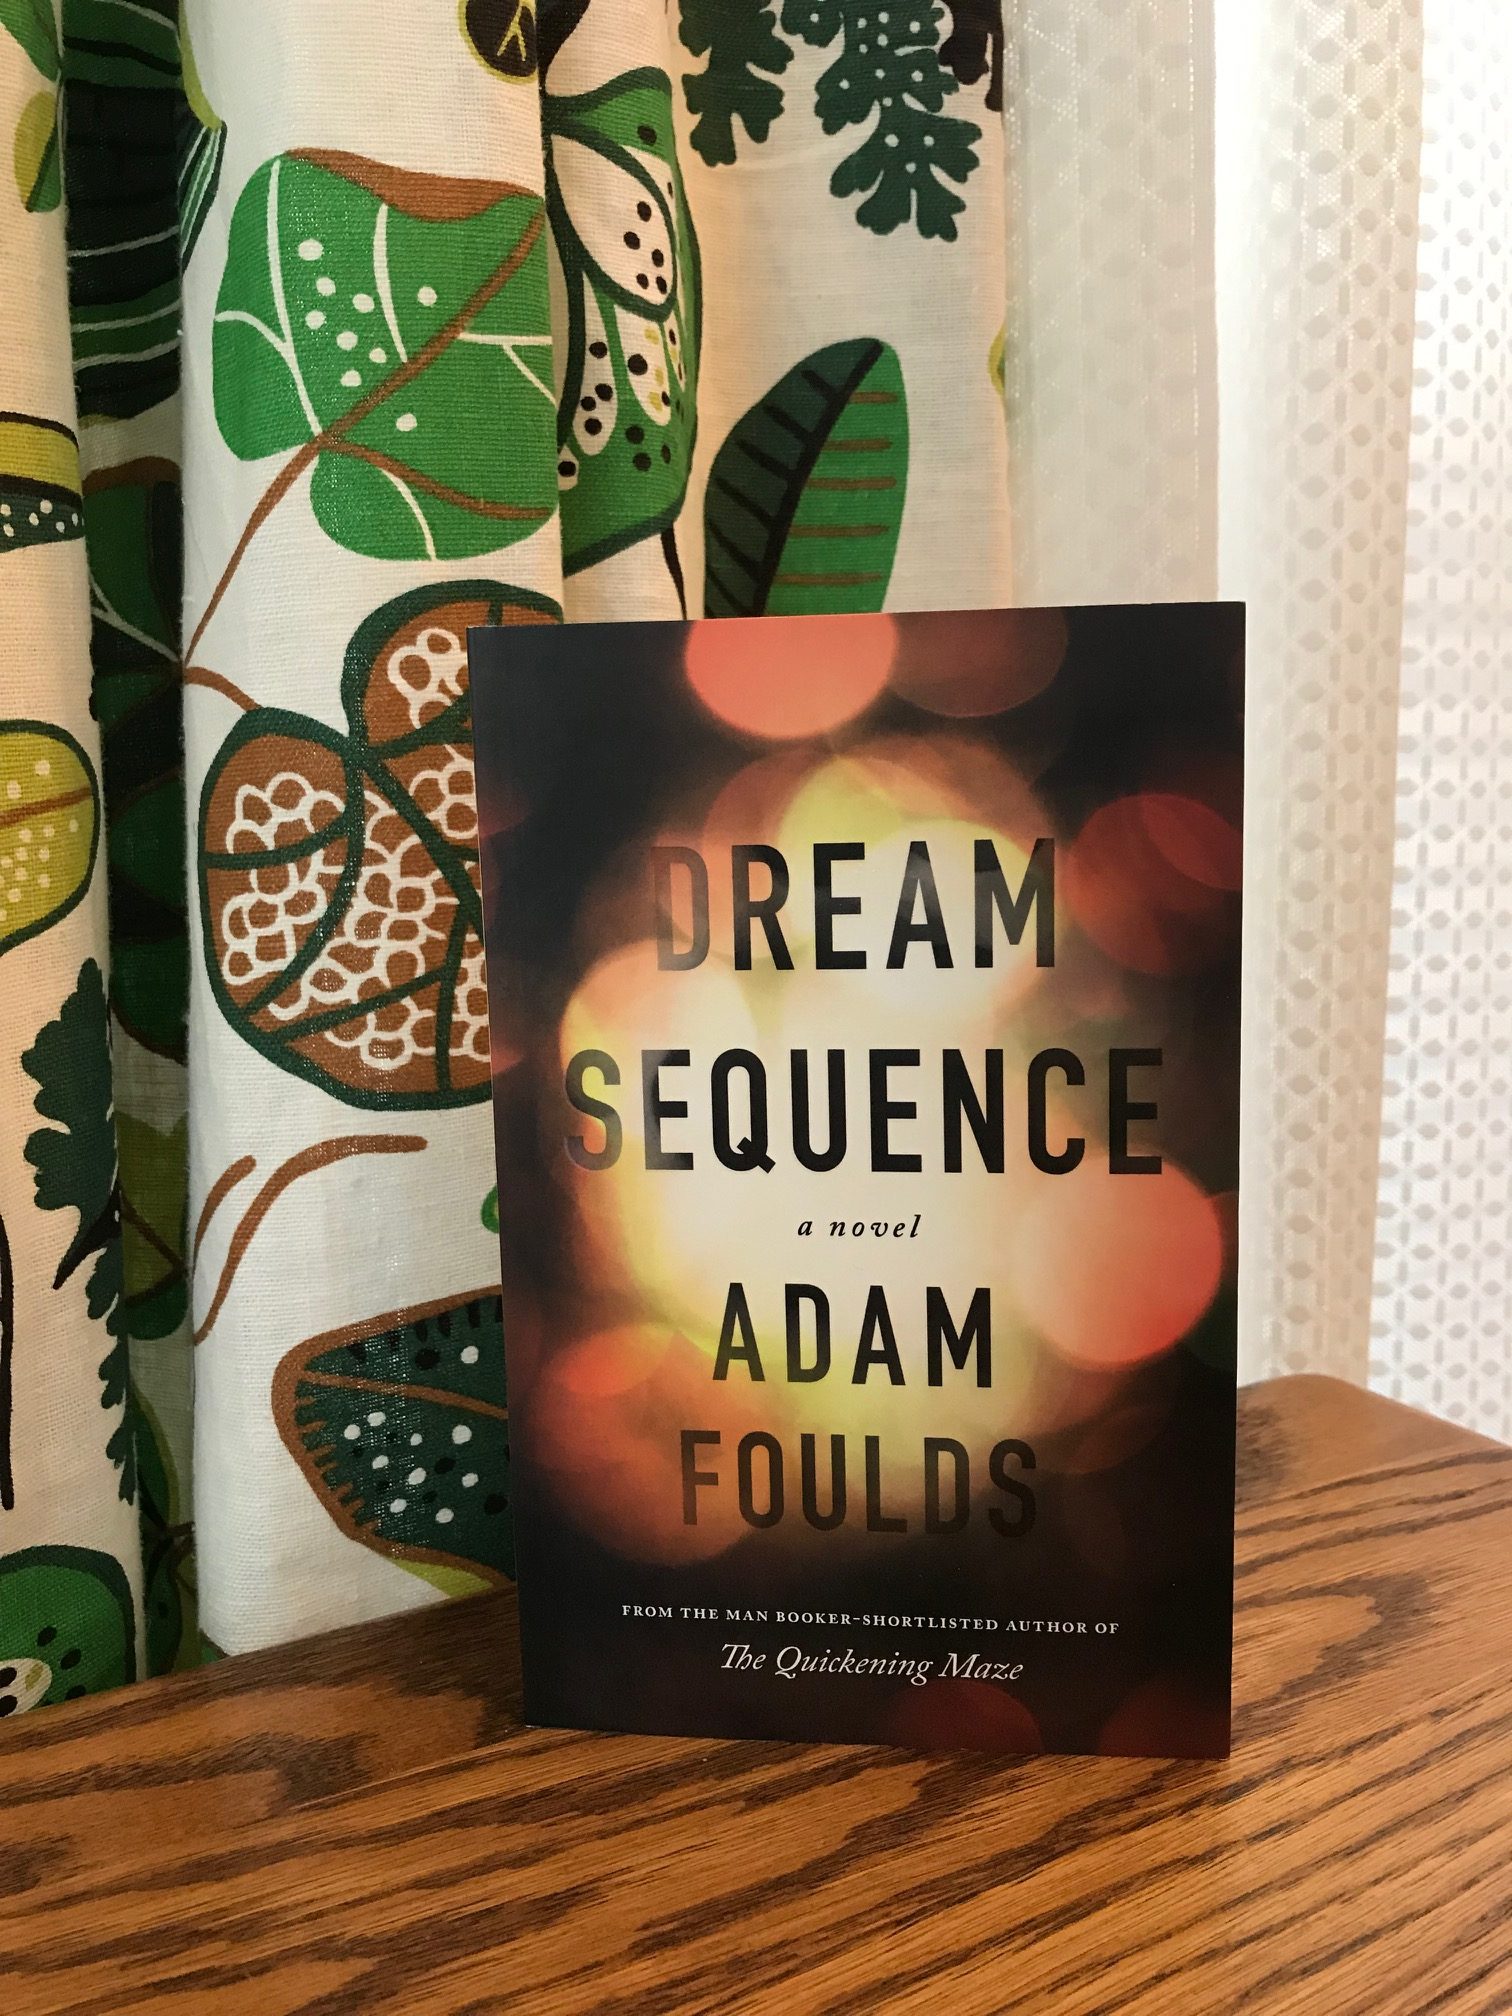 Book Review: Dream Sequence by Adam Foulds